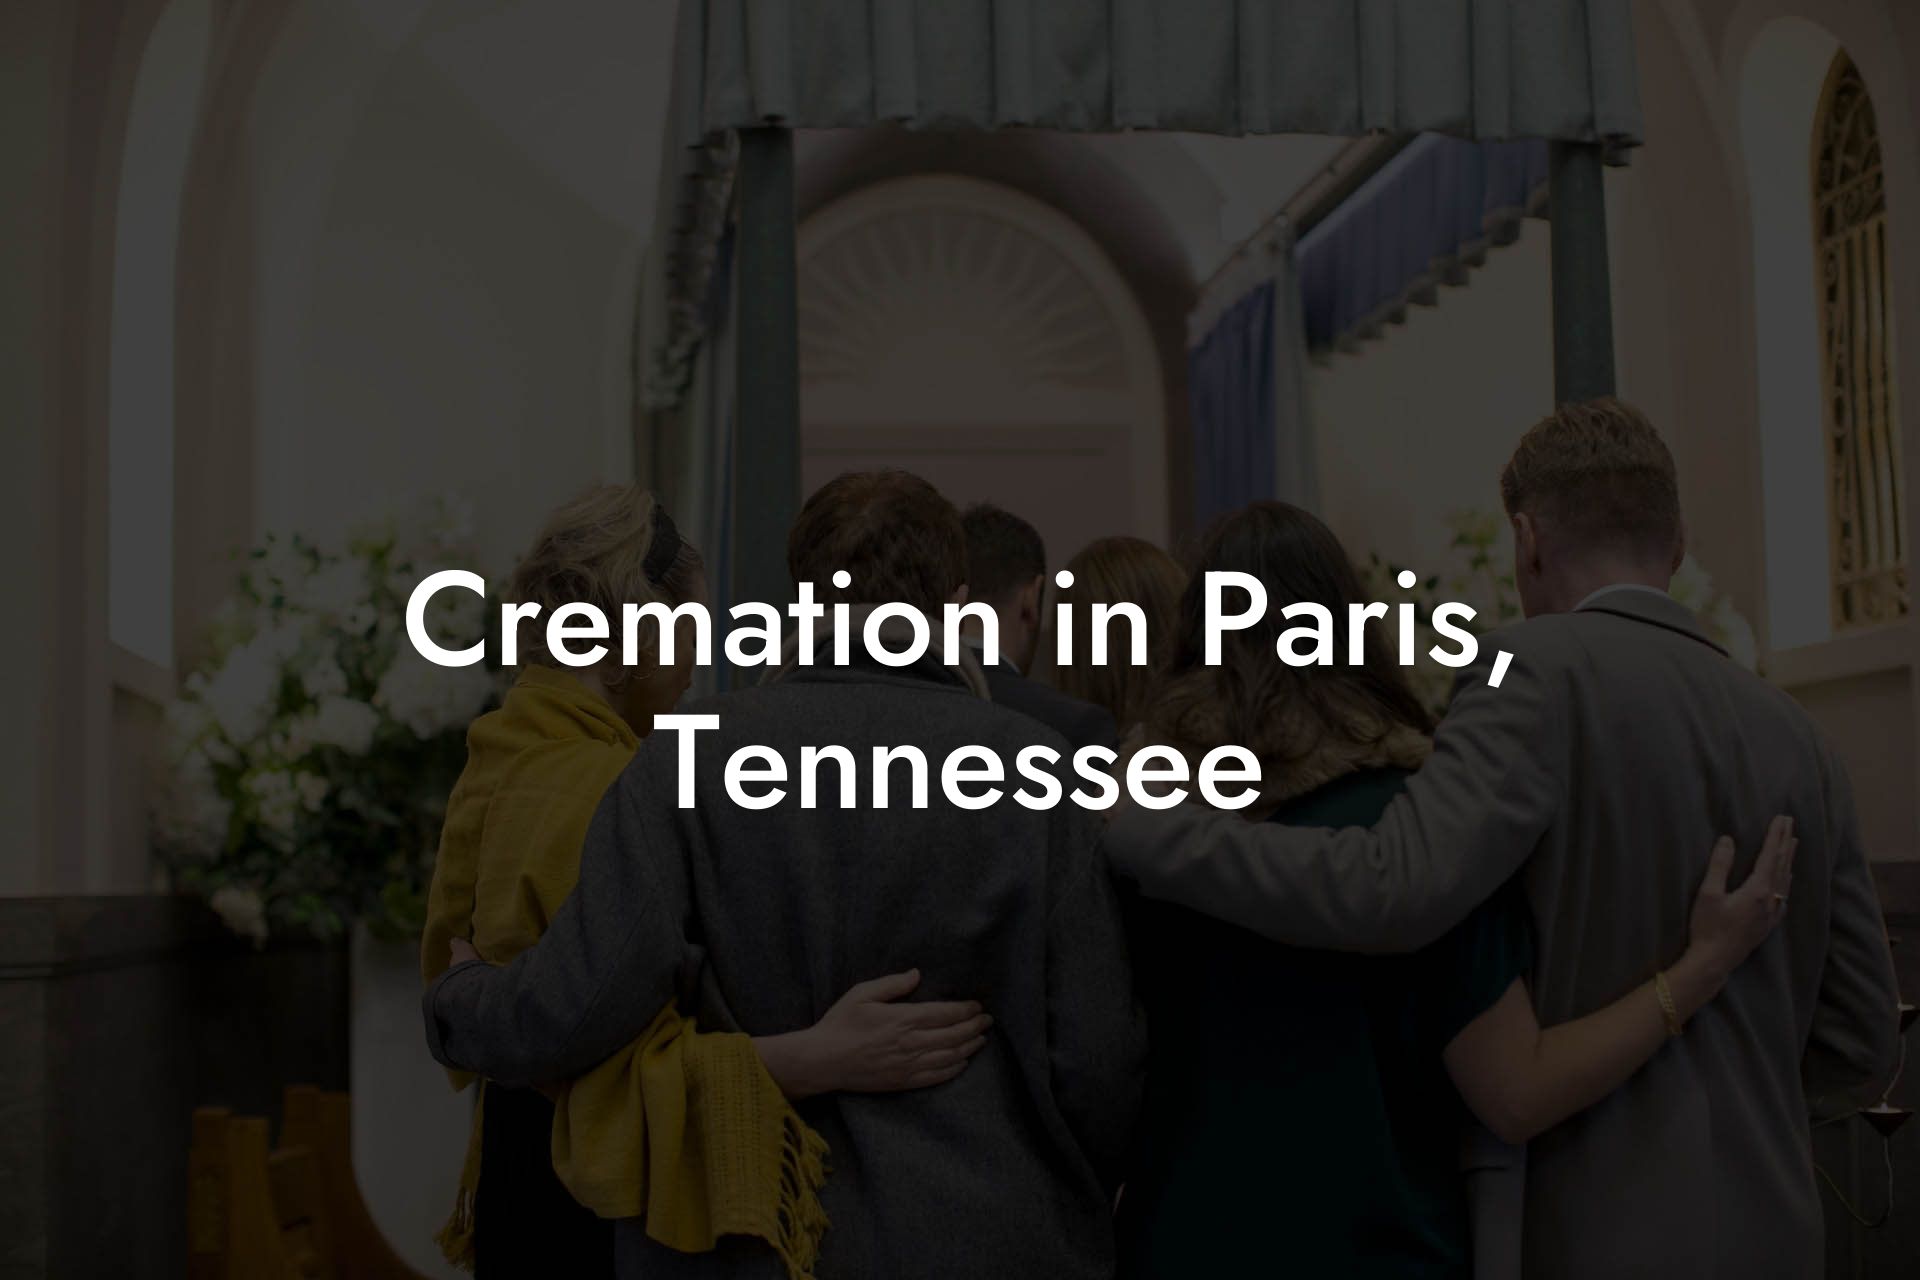 Cremation in Paris, Tennessee